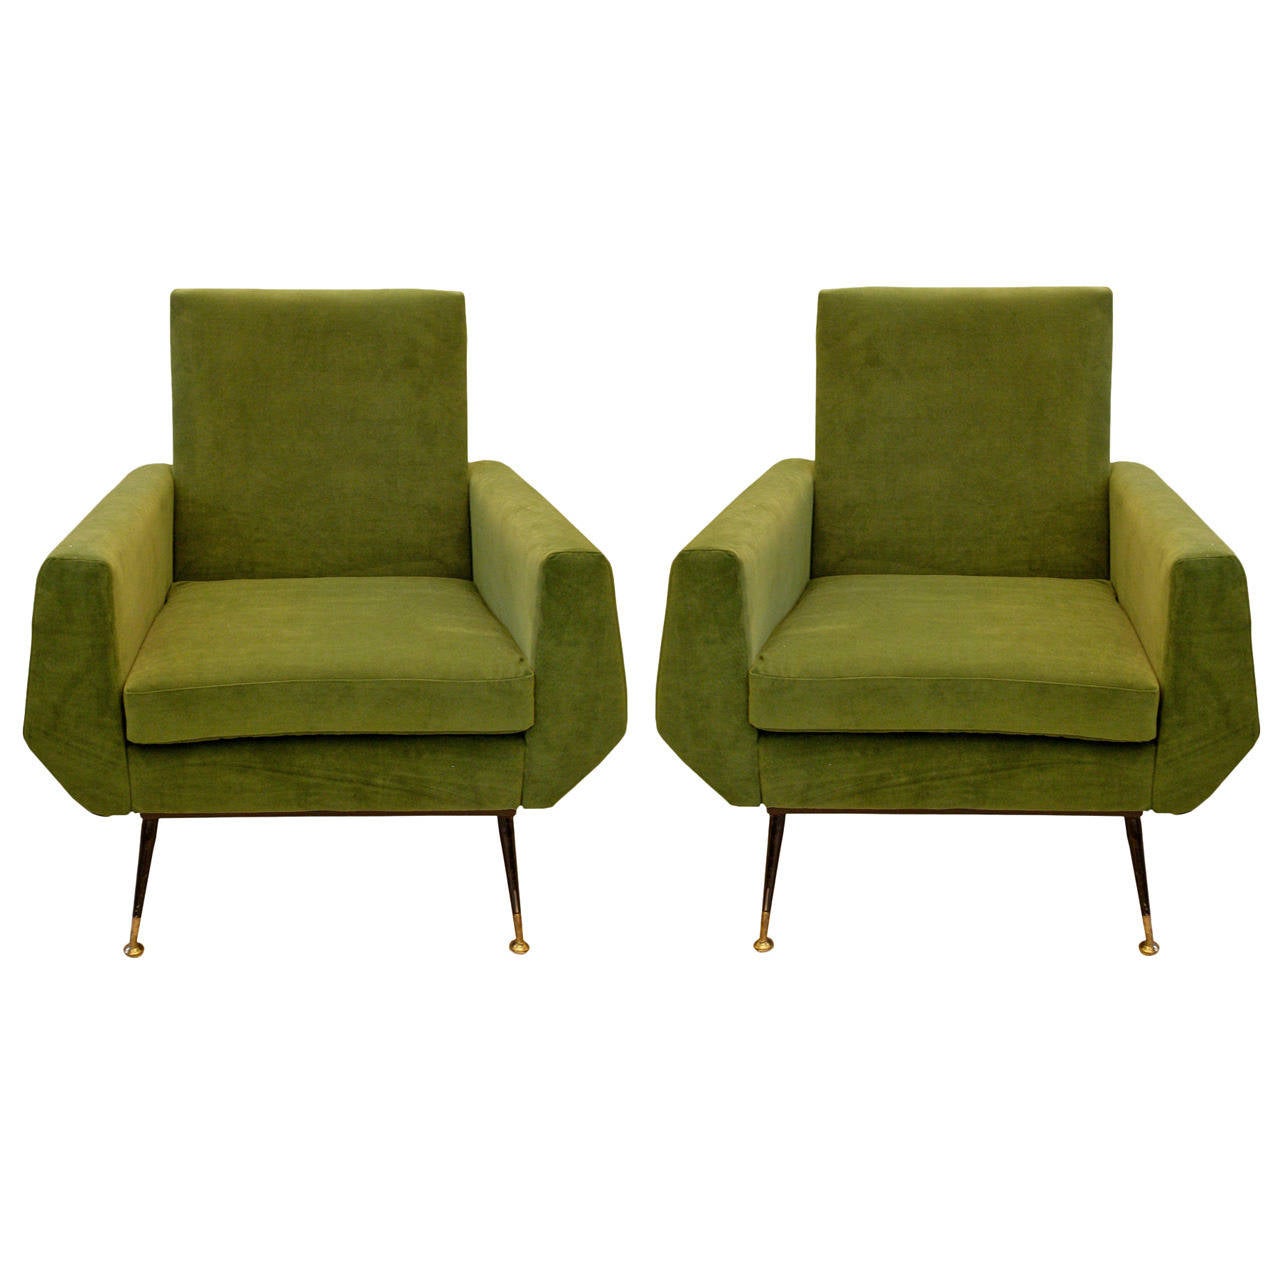 Pair of 1950s Italian Design Armchairs For Sale